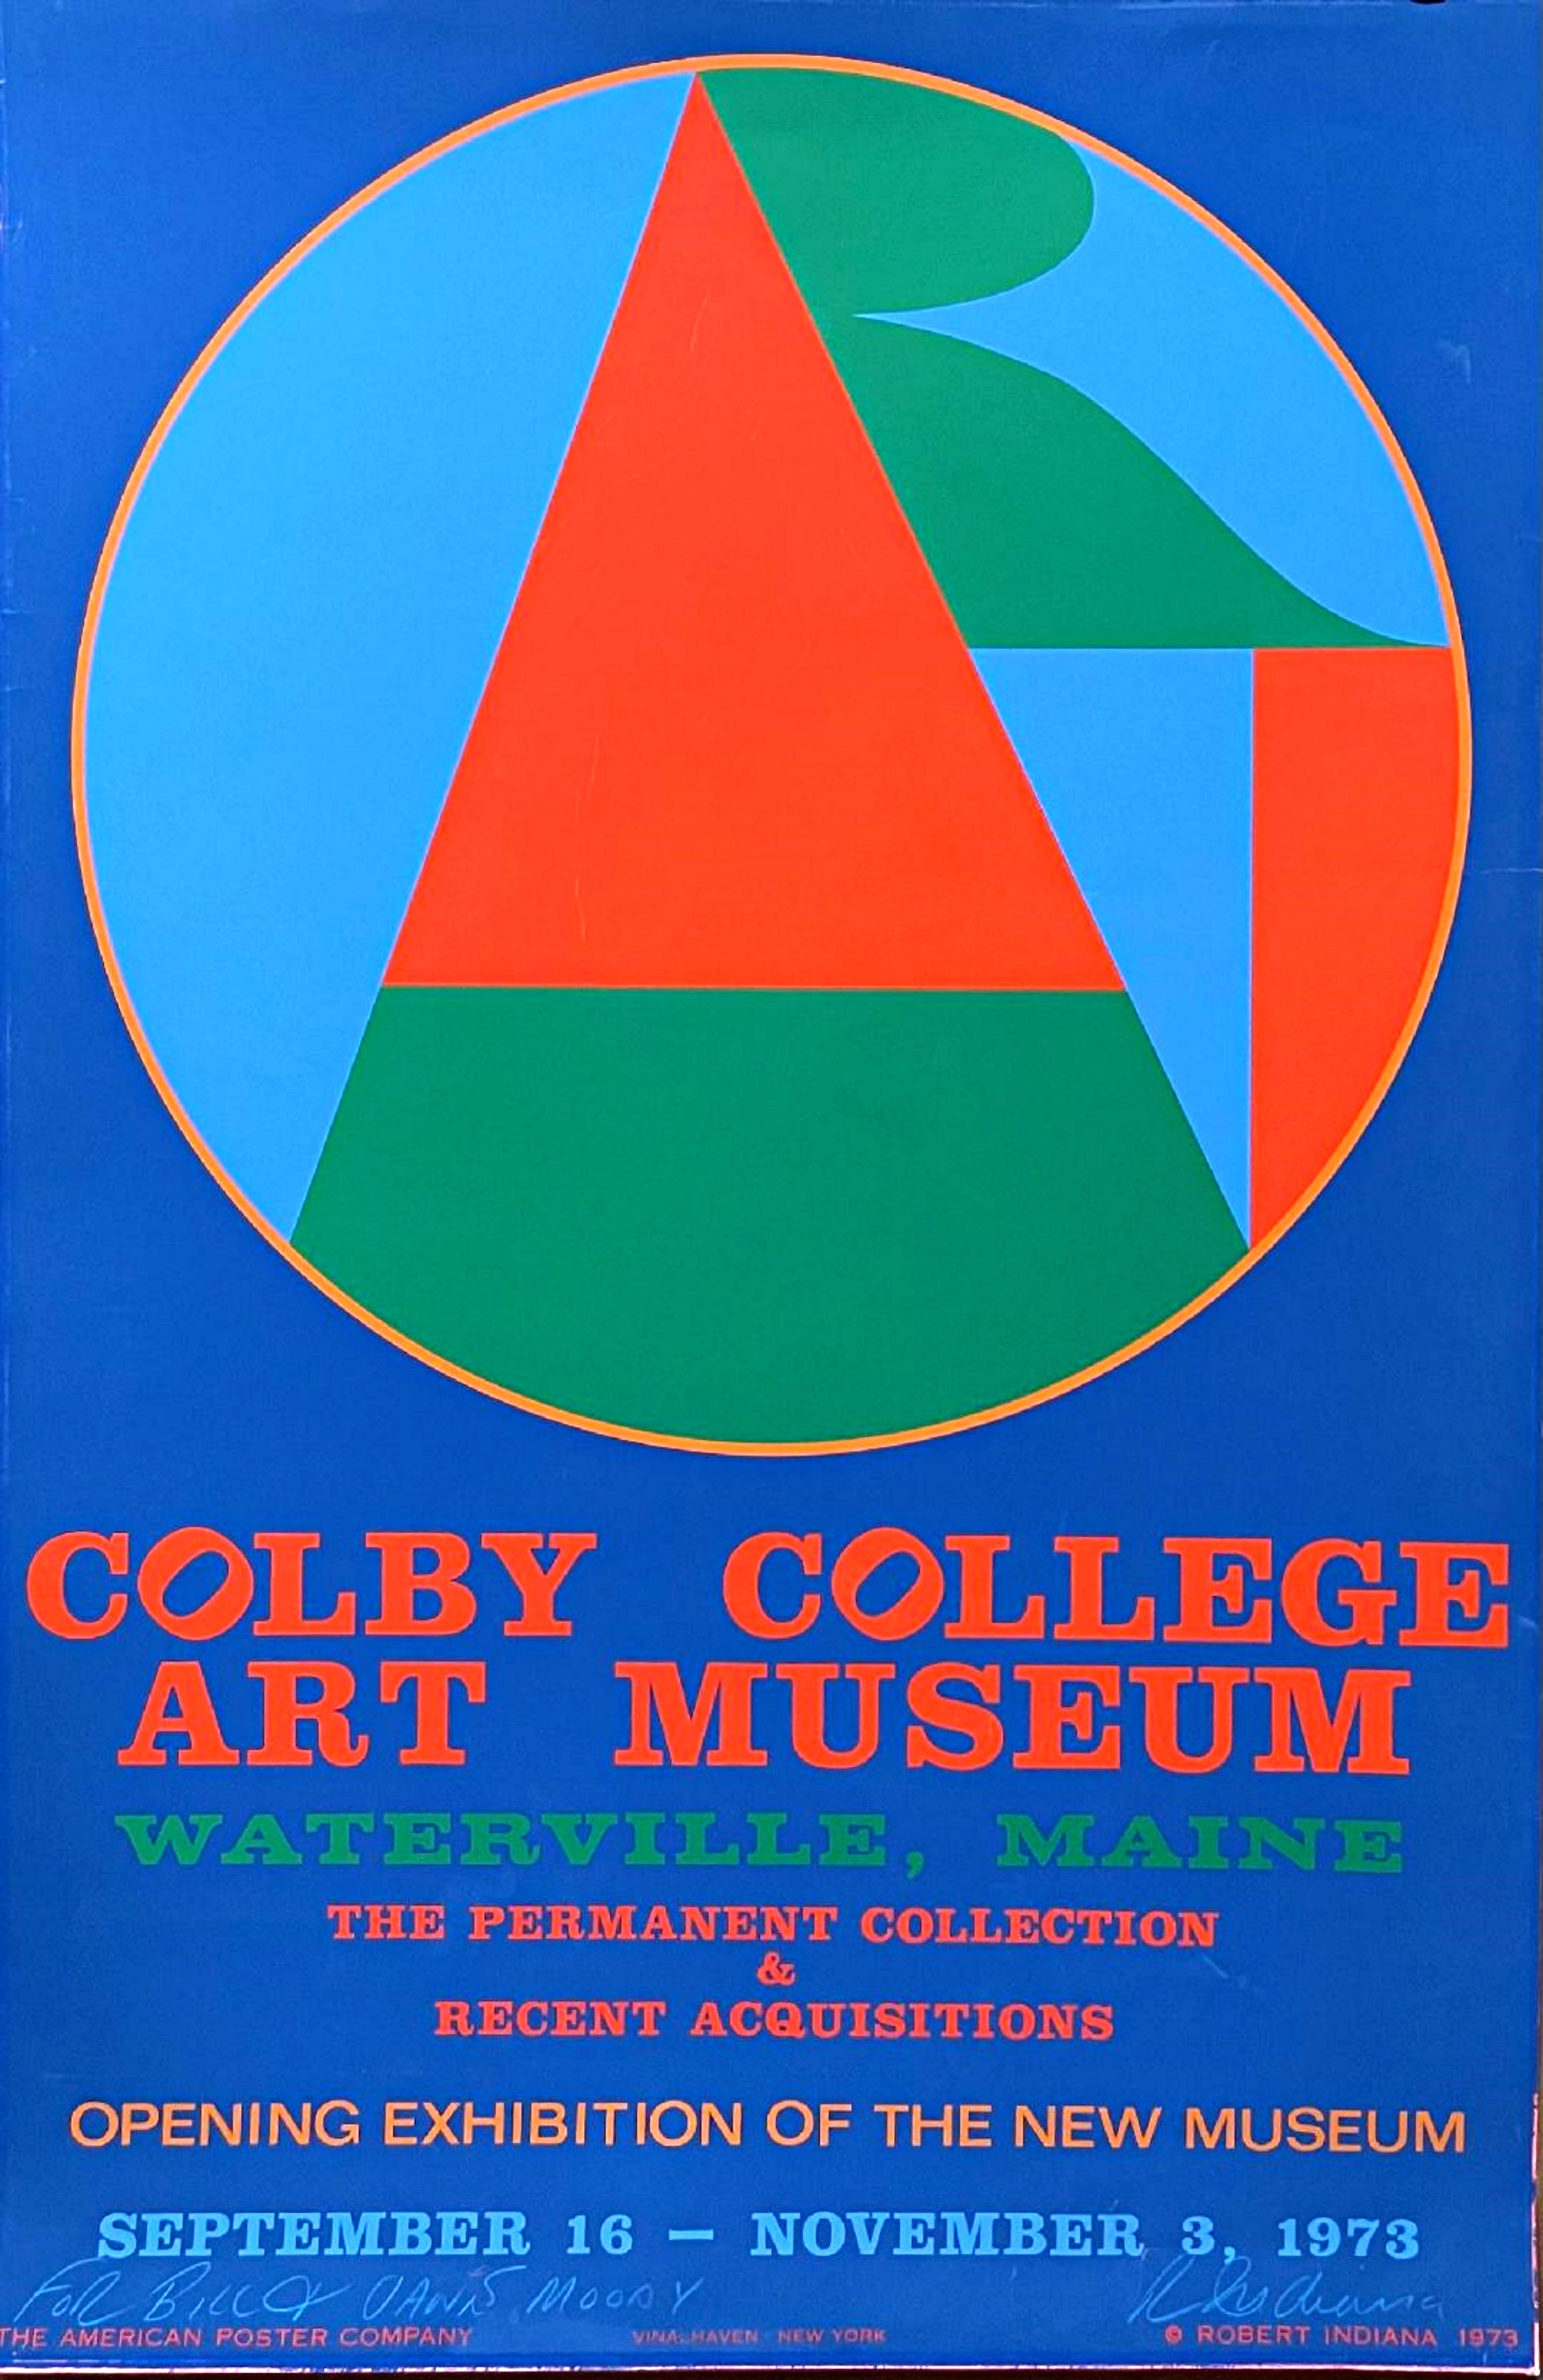 Robert Indiana
ART, poster for Colby College Museum exhibition (hand signed and inscribed by Robert Indiana), 1973
Offset lithograph poster
Hand signed and inscribed by the artist on the front
35 × 23 inches
This uniquely signed and inscribed poster